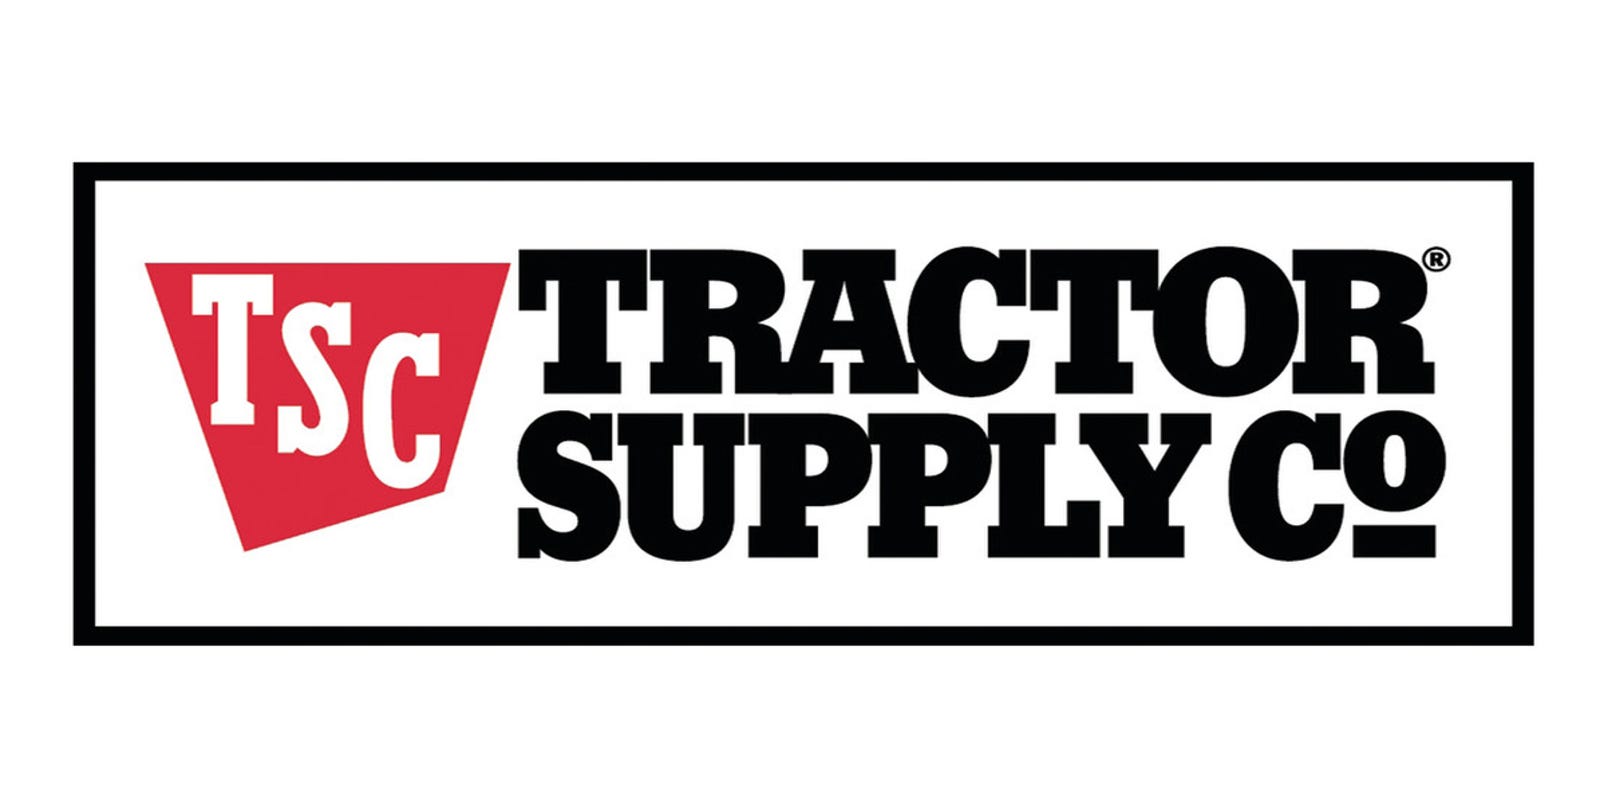 Tractor Supply to raise funds for 4-H